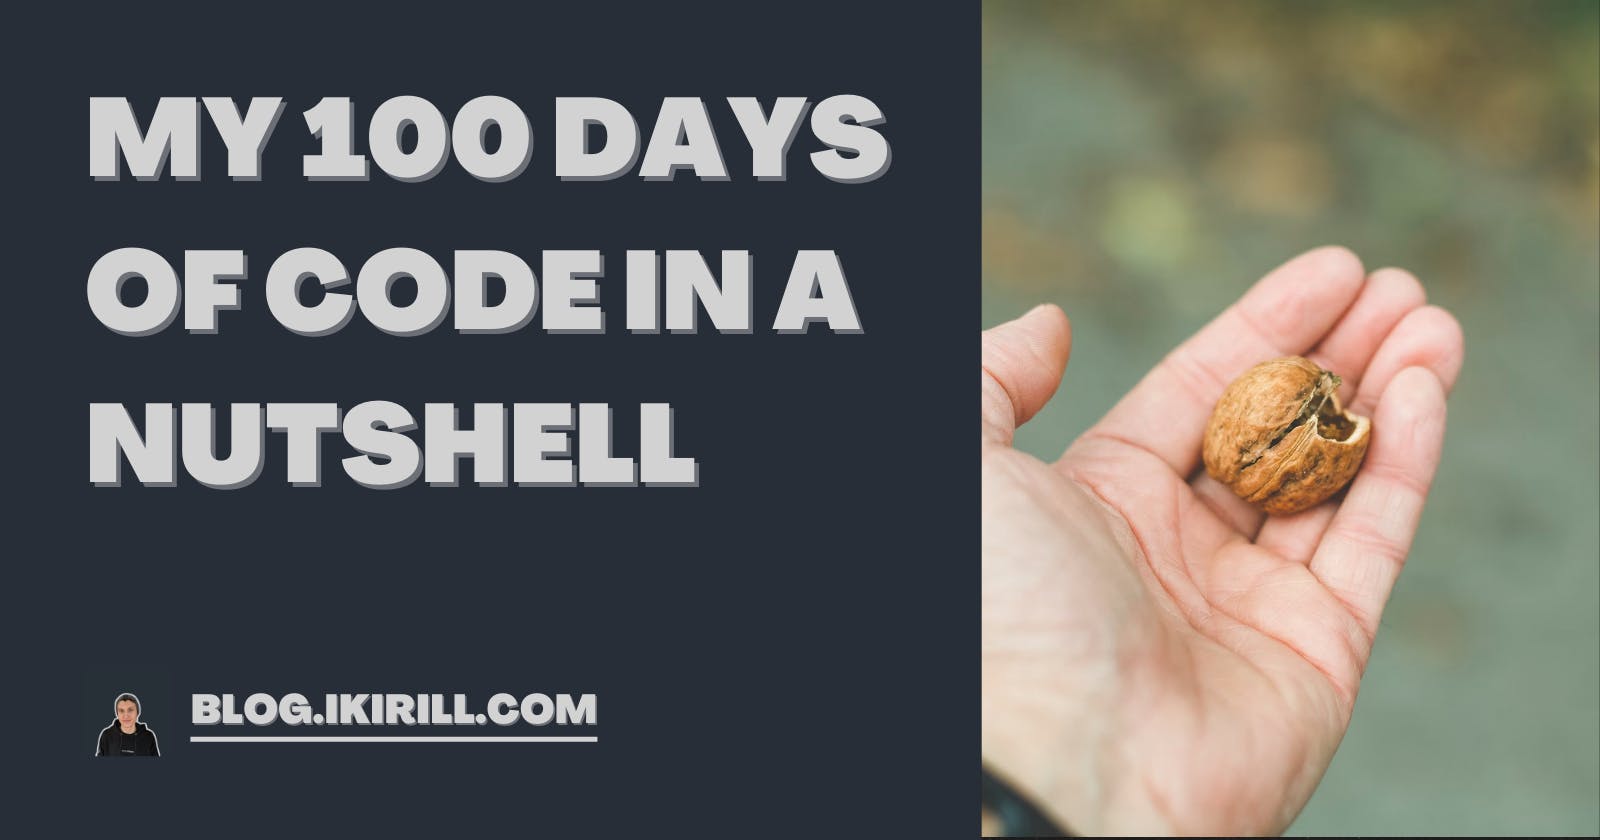 My 100 Days of Code in a Nutshell